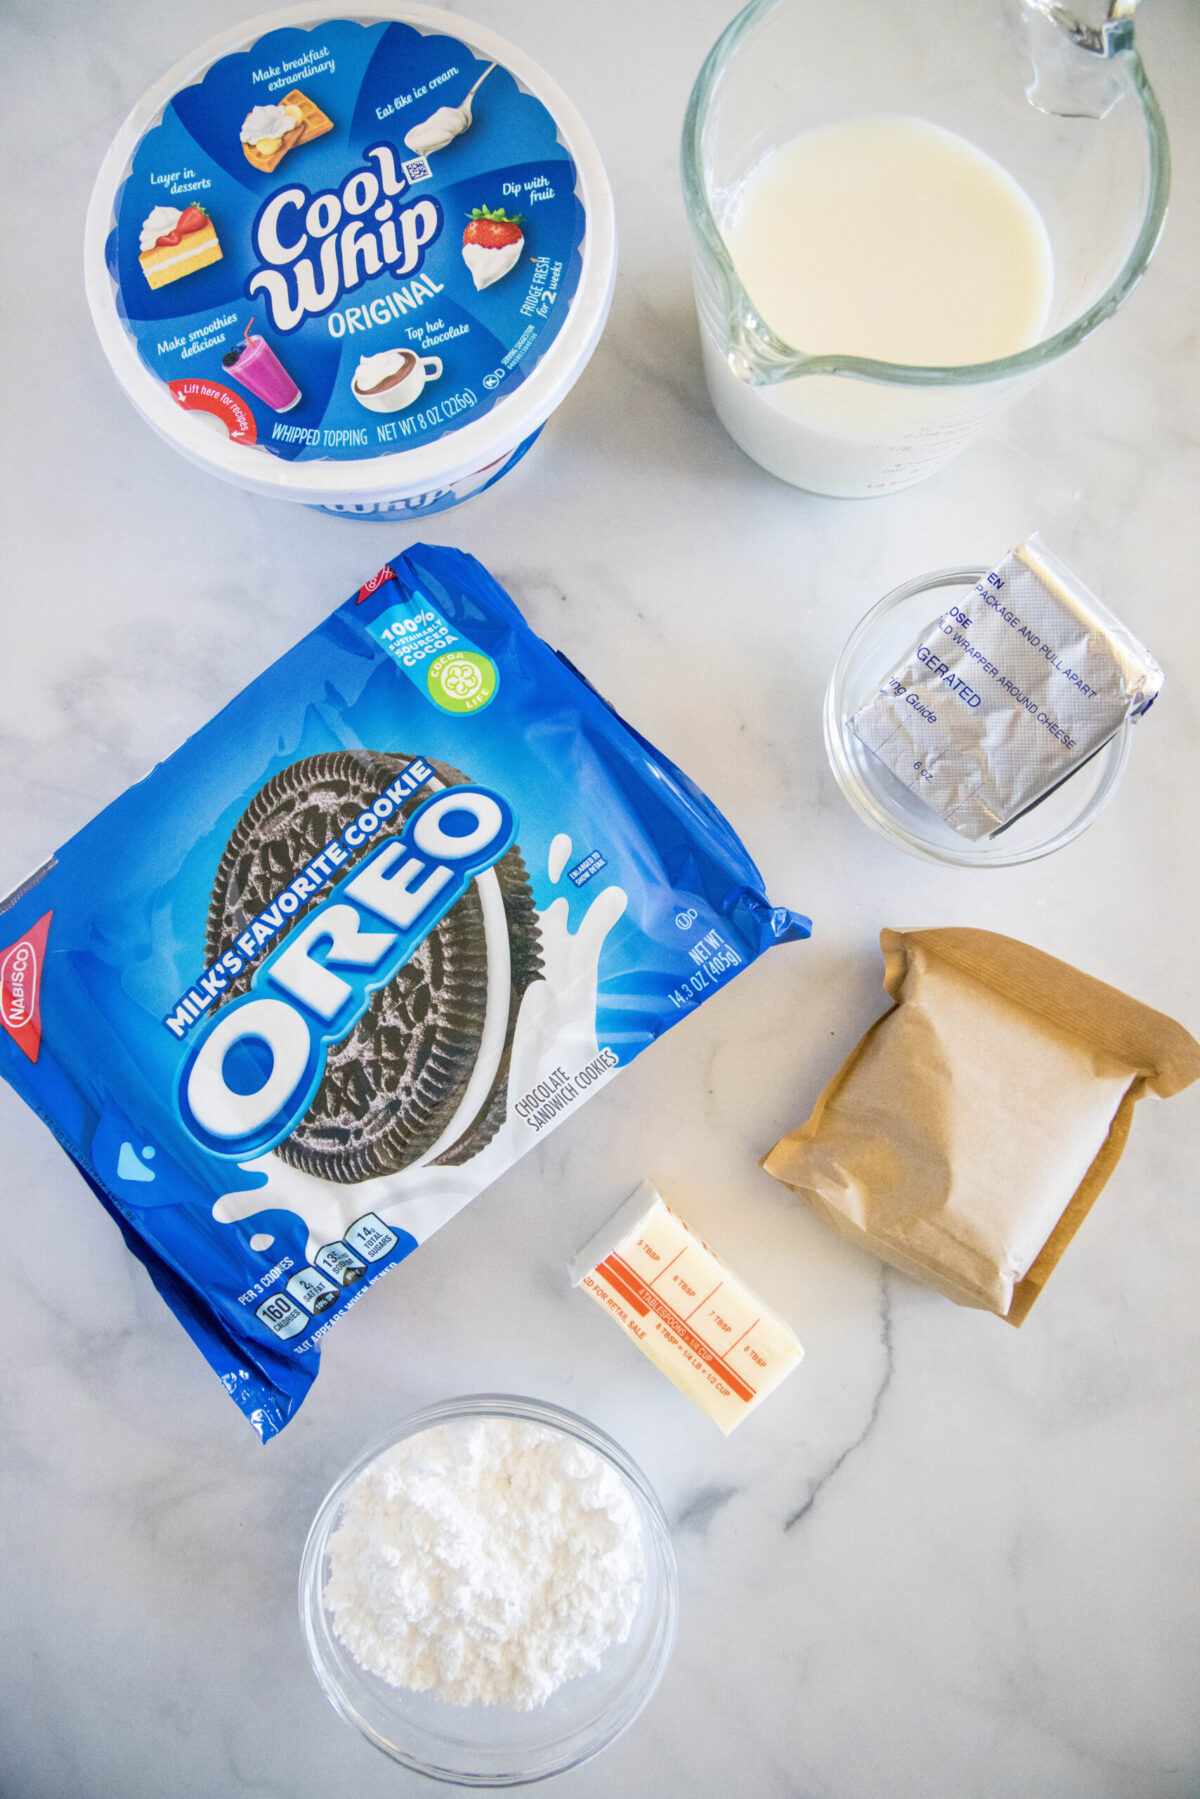 Overhead view of the ingredients needed for no bake Oreo cream squares: a pack of Oreos, a tub of Cool Whip, a pack of chocolate pudding mix, a pyrex of milk, a bowl of cream cheese, a bowl of powdered sugar, and half a stick of butter